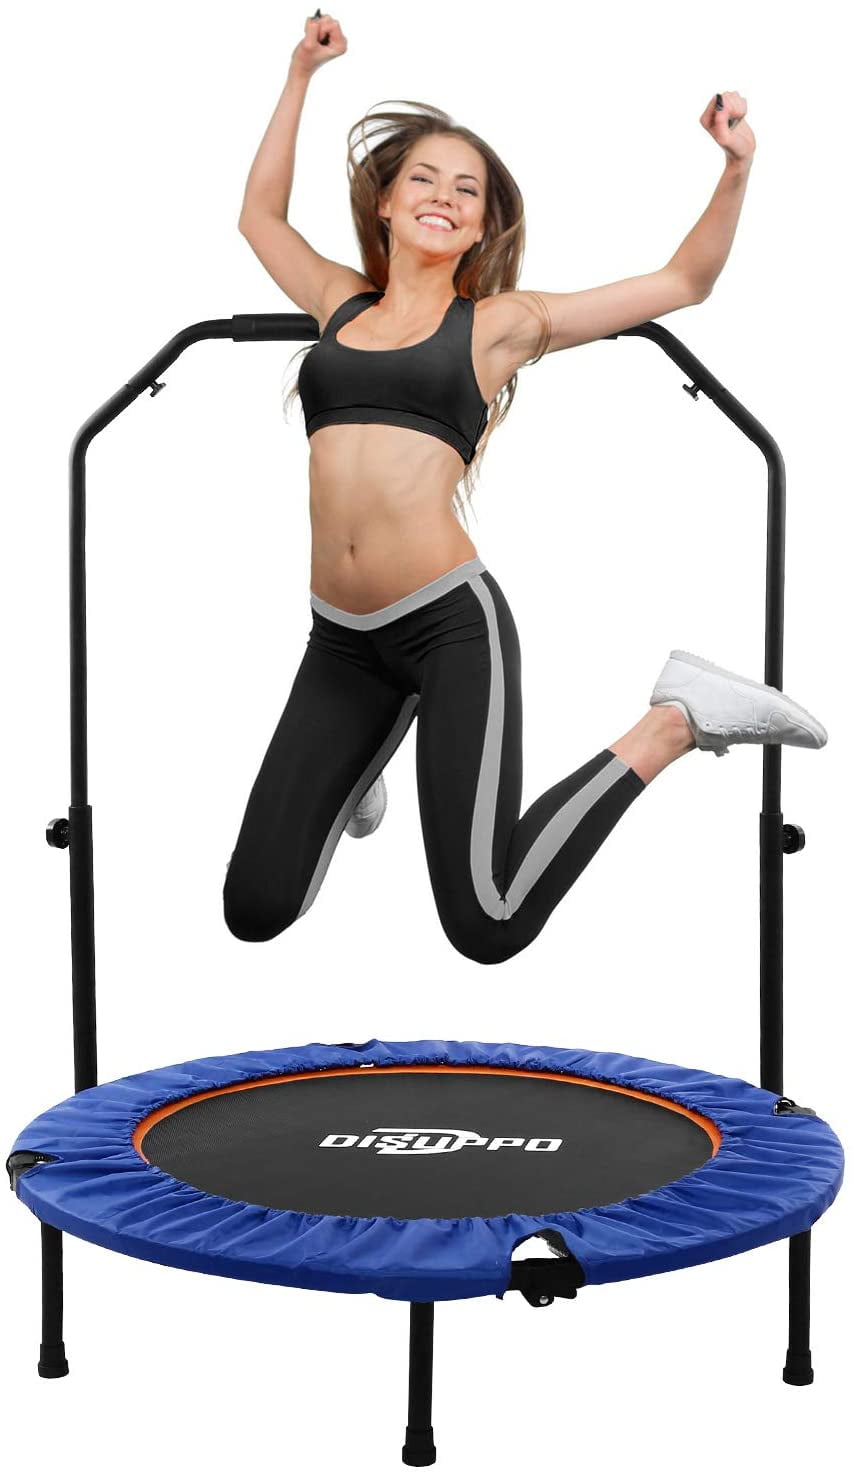 Max Limit 330 lbs Gielmiy 40 Silent Fitness Mini Trampoline Covered Bungee Rope System Best Urban Cardio Jump Fitness Workout Trainer Indoor Rebounder for Adults